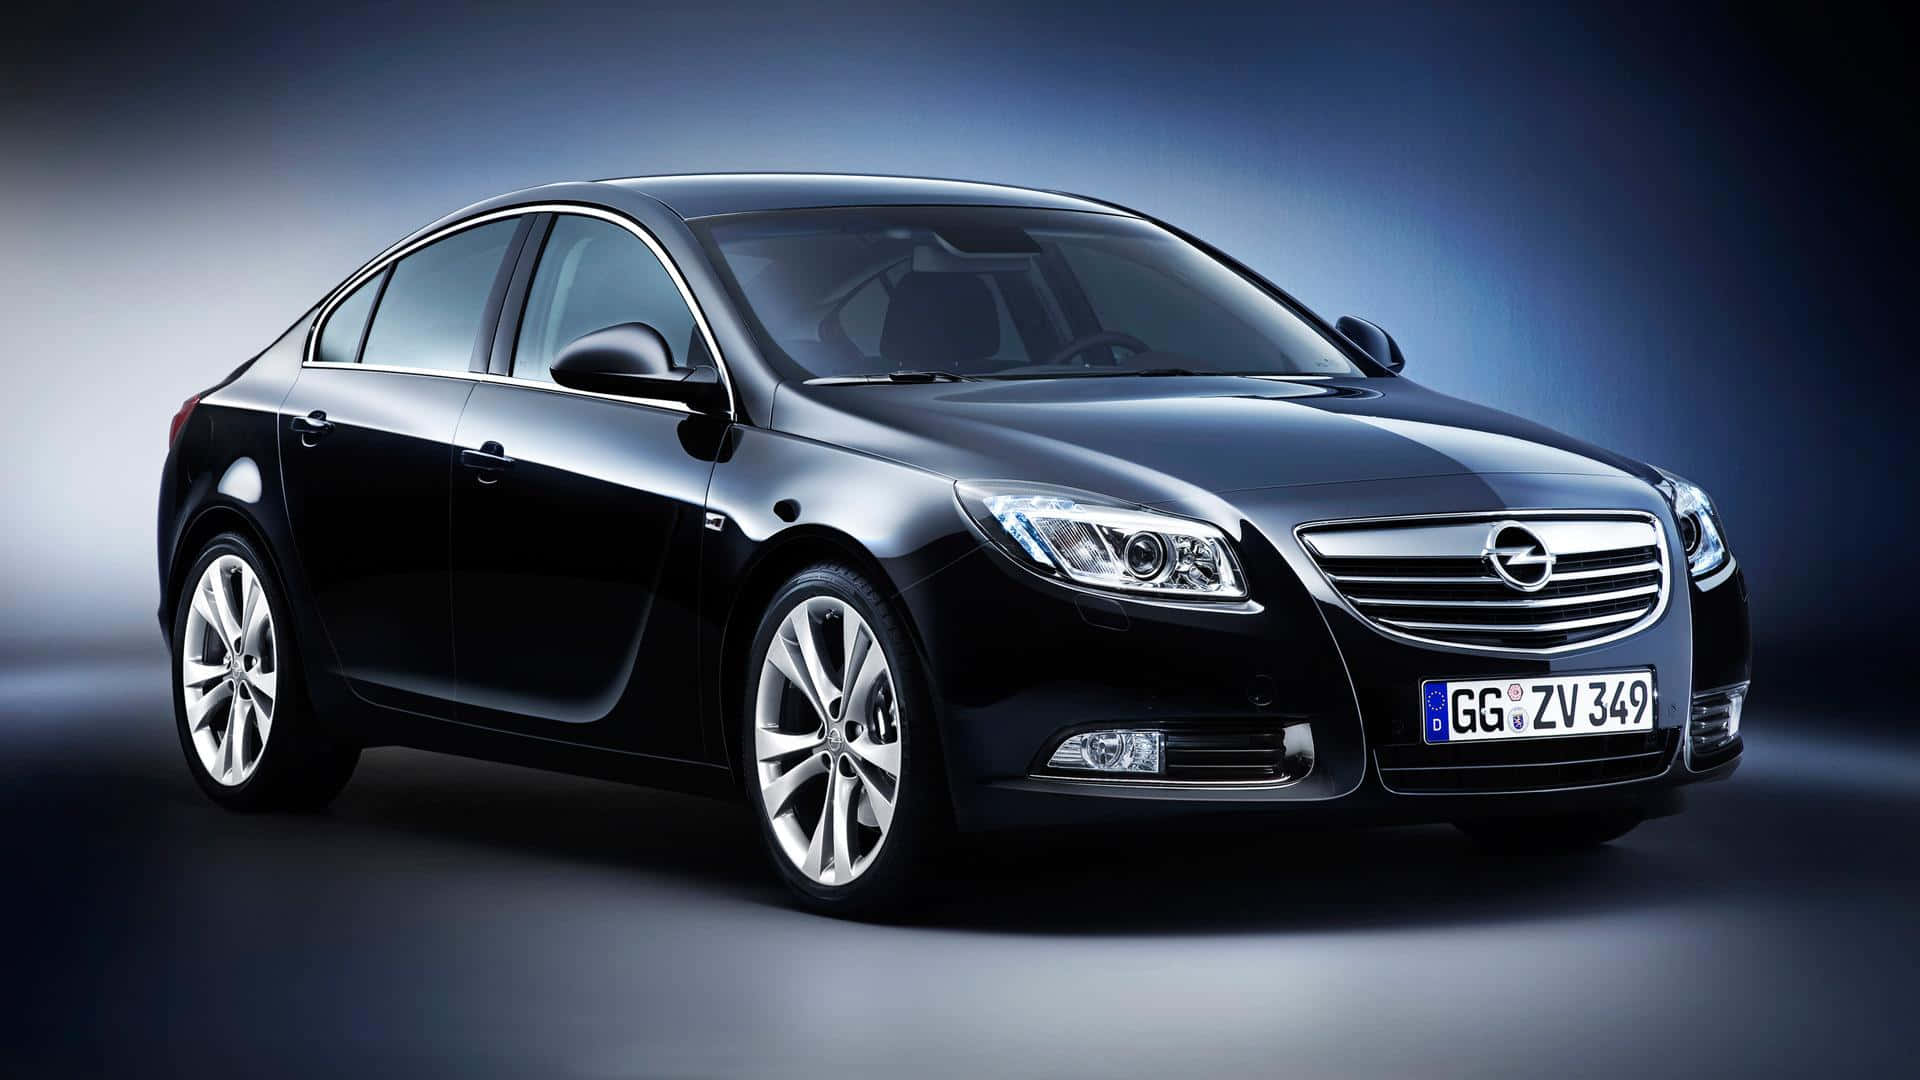 Captivating Opel Insignia on the Road Wallpaper